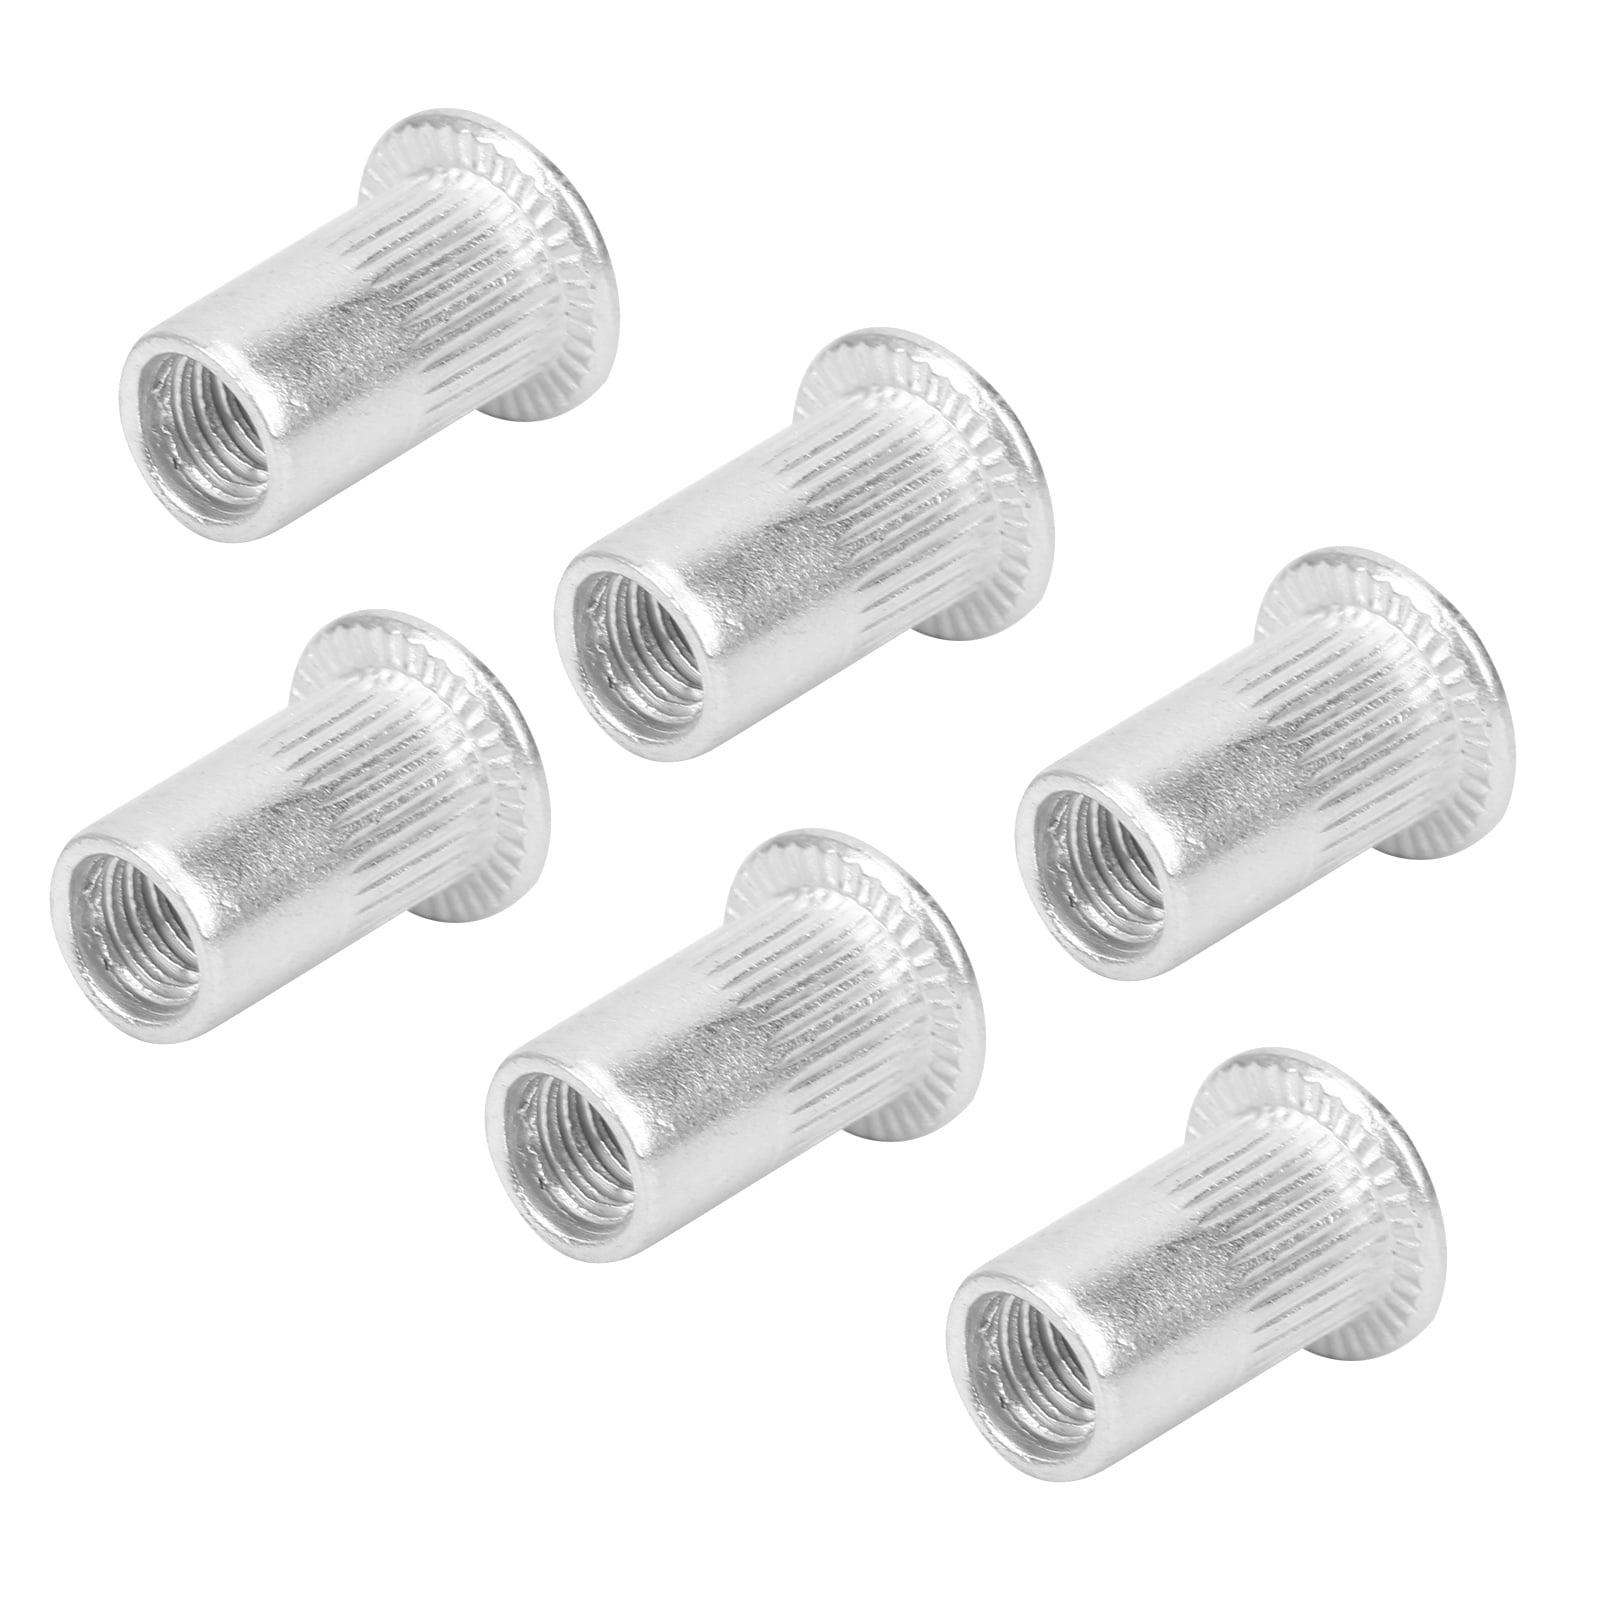 Stainless Steel Rivet Nut M3/M4/M5/M6/M8 Durable and long service life 150PCS simple and practical for elevators Automobiles Box packaging Rivet Nut Set 